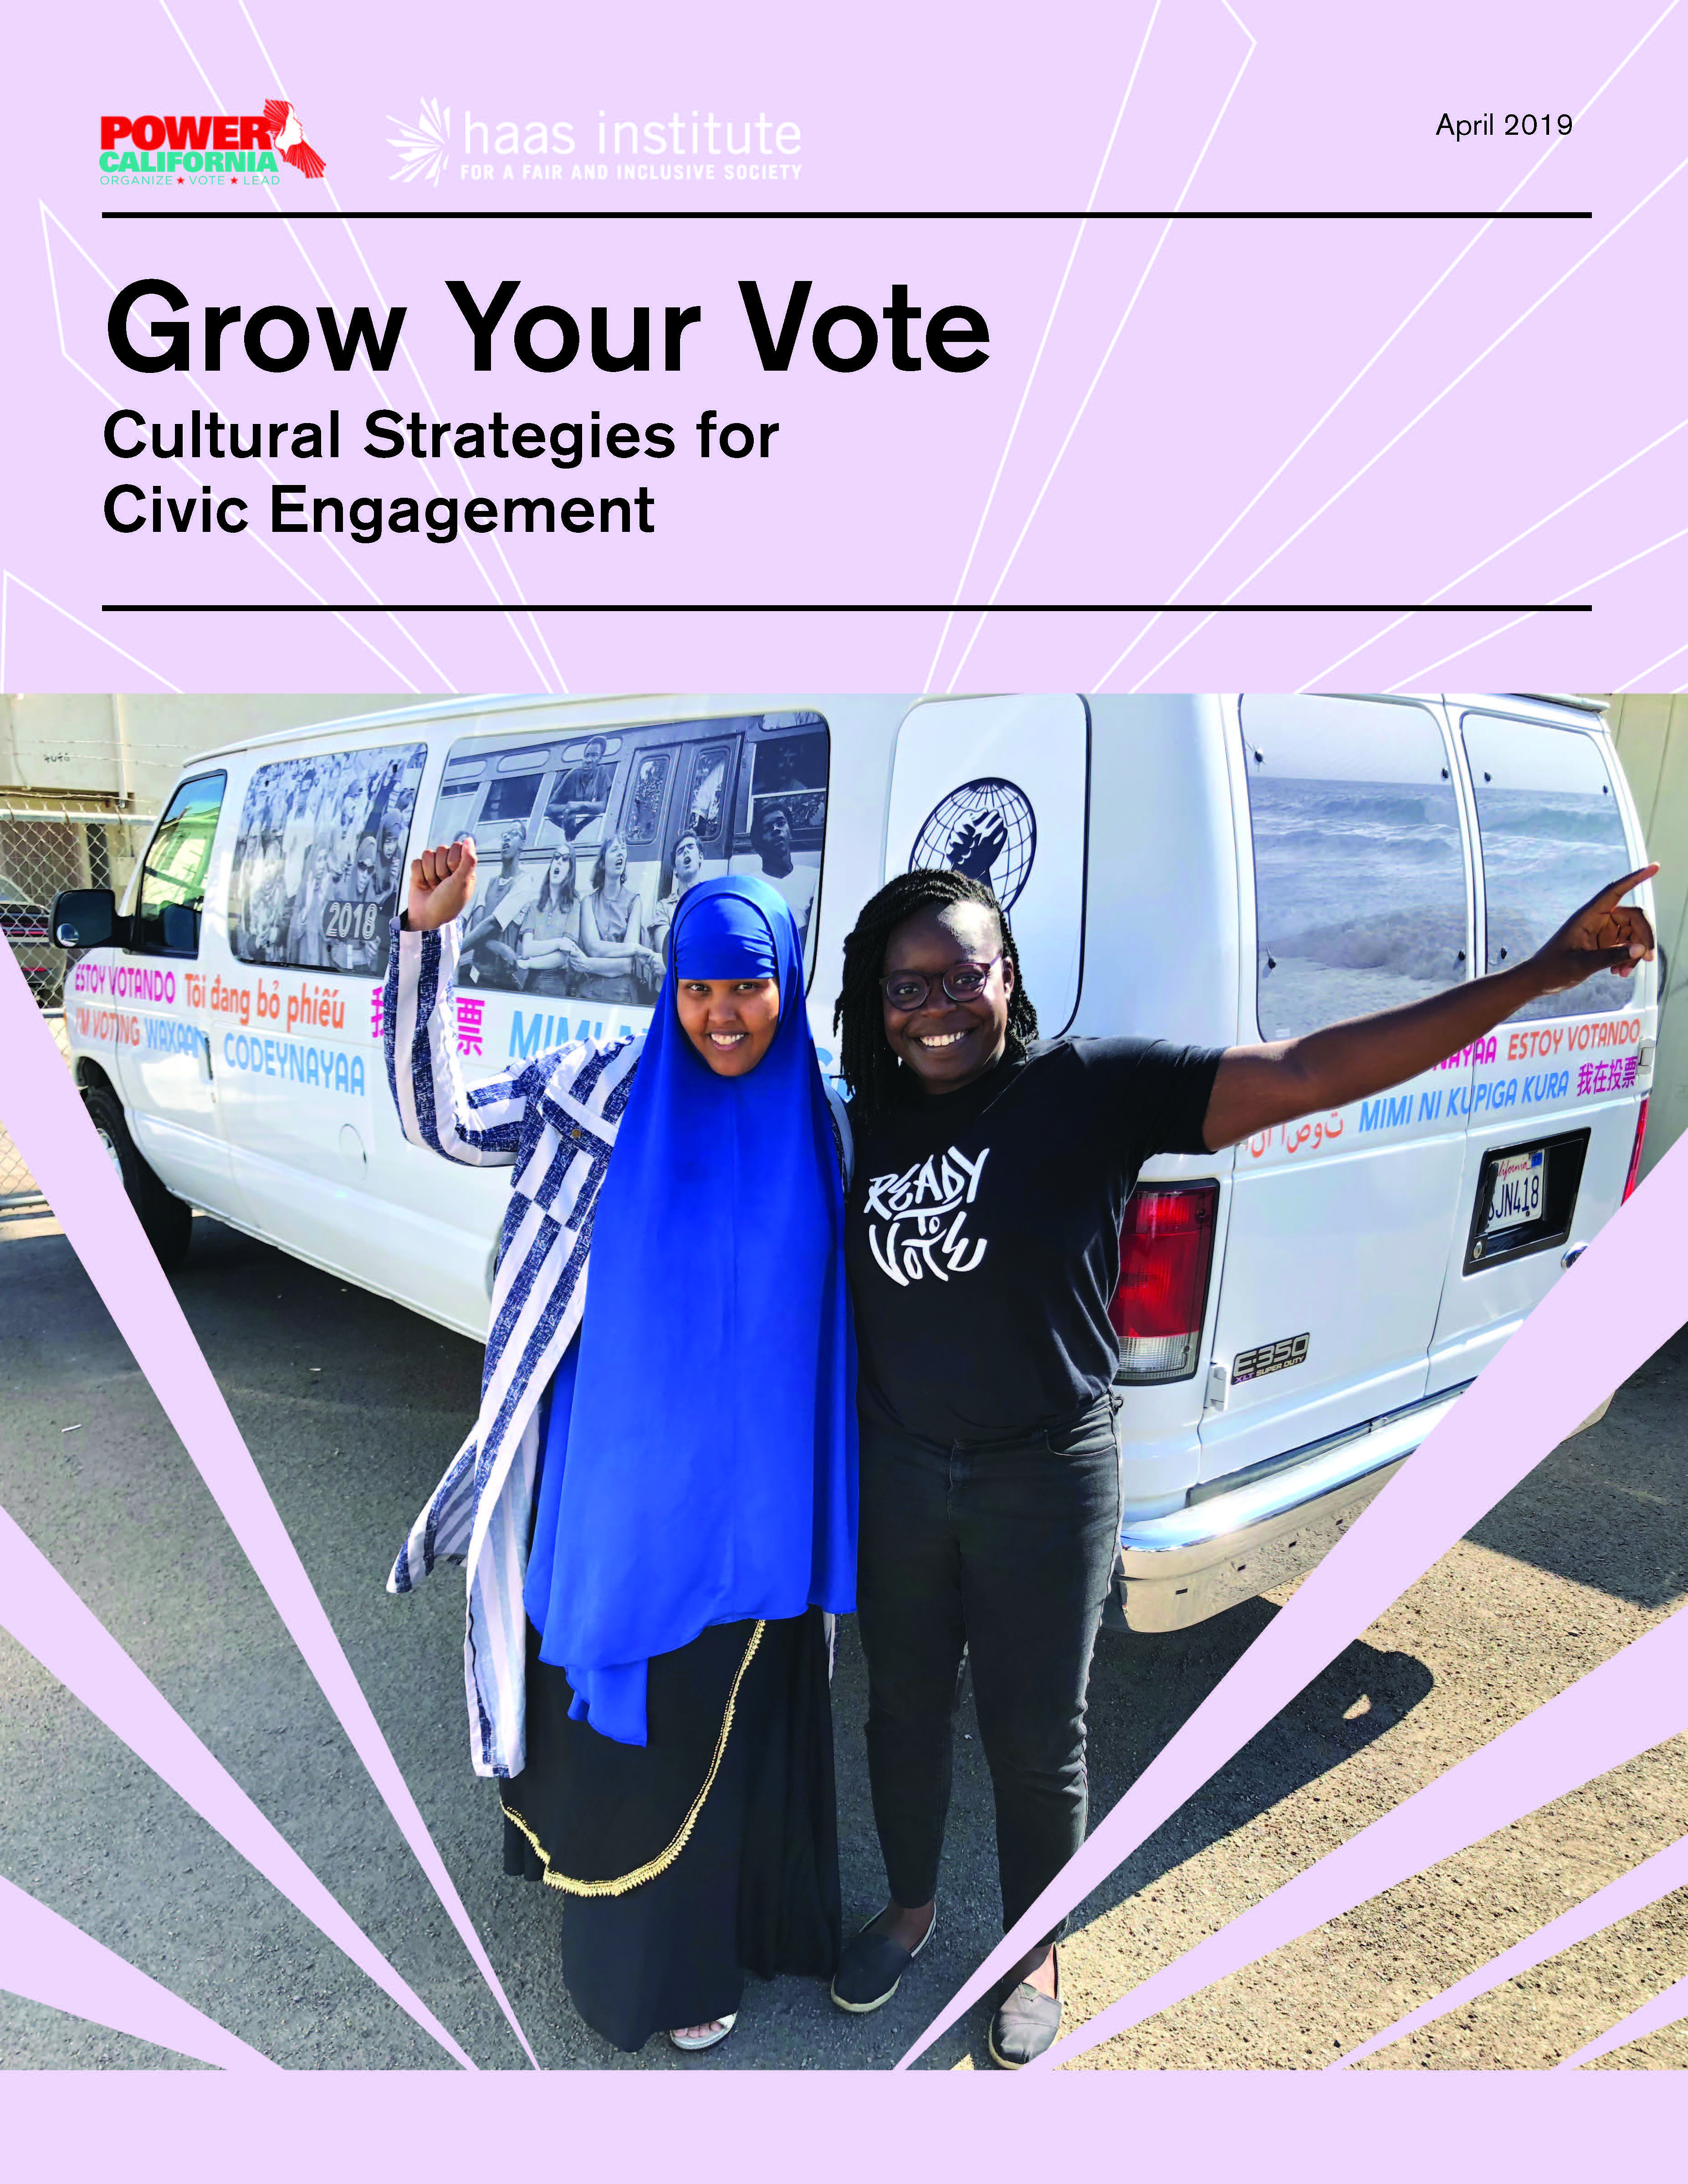 Cover of the Cultural Strategy Report shows two women, one wearing a blue hijab, making victory gestures in front of a white van